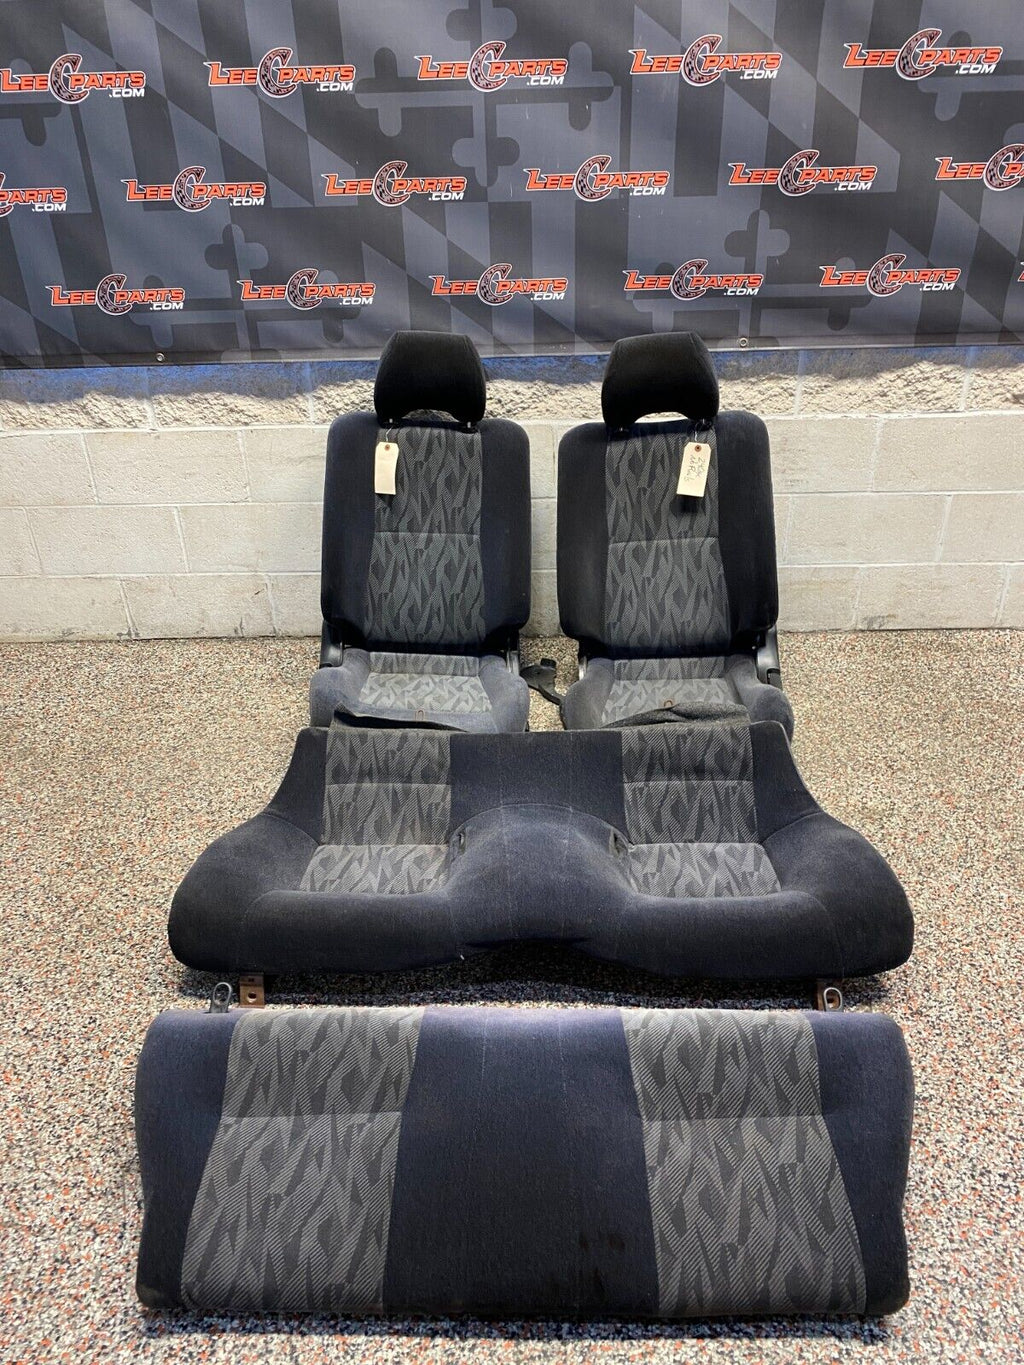 1998 NISSAN 240SX OEM BLACK/GREY CLOTH FRONT REAR SEATS PAIR USED NICE!!!